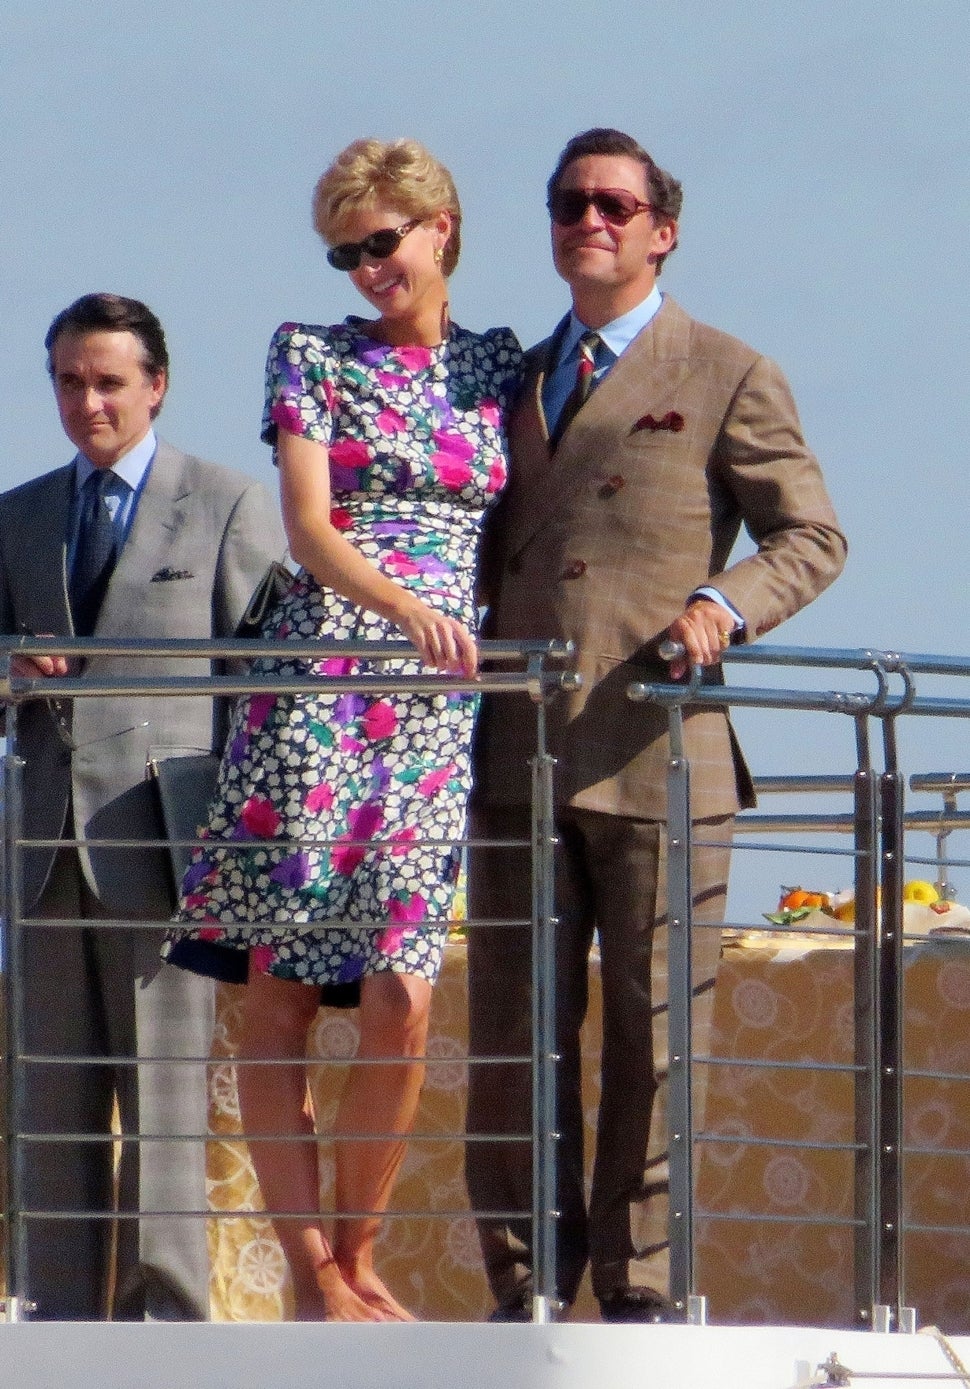 Elizabeth Debicki and Dominic West as Diana and Charles